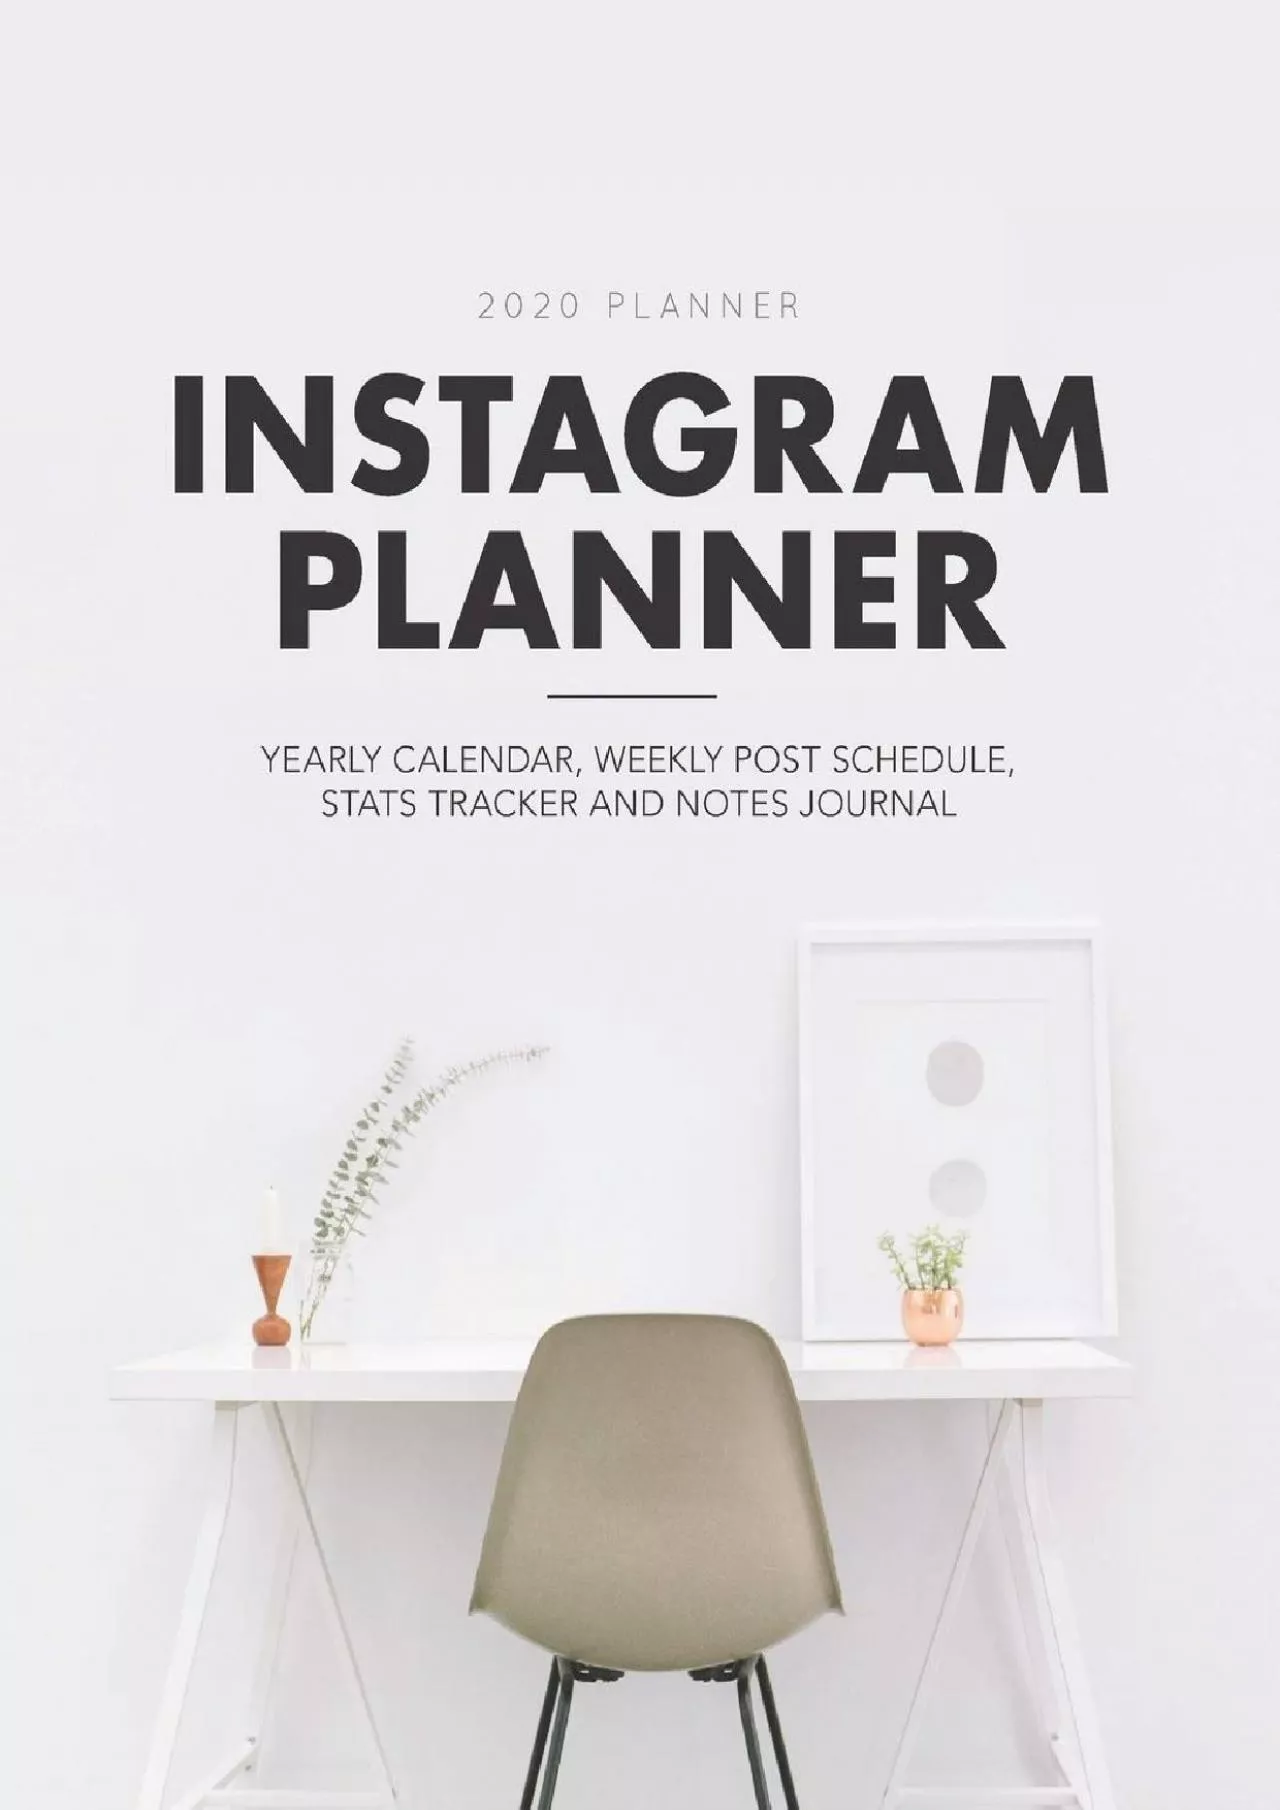 Instagram Planner: A Yearly Calendar, Weekly Post Schedule, Stats Tracker and Notes Journal